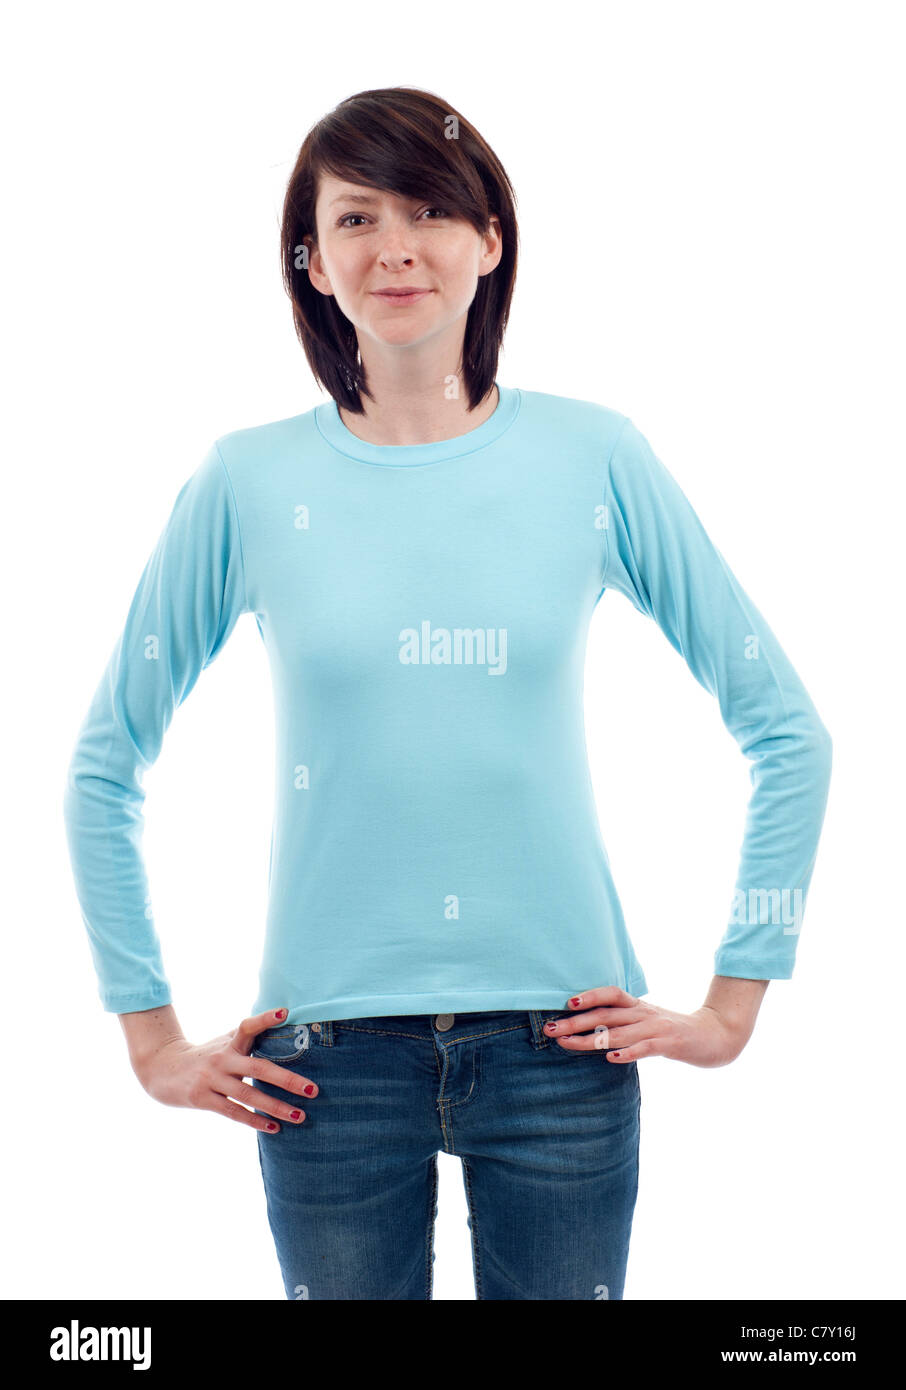 Young beautiful woman with blank light blue long sleeve shirt, Ready for your design or logo. Stock Photo